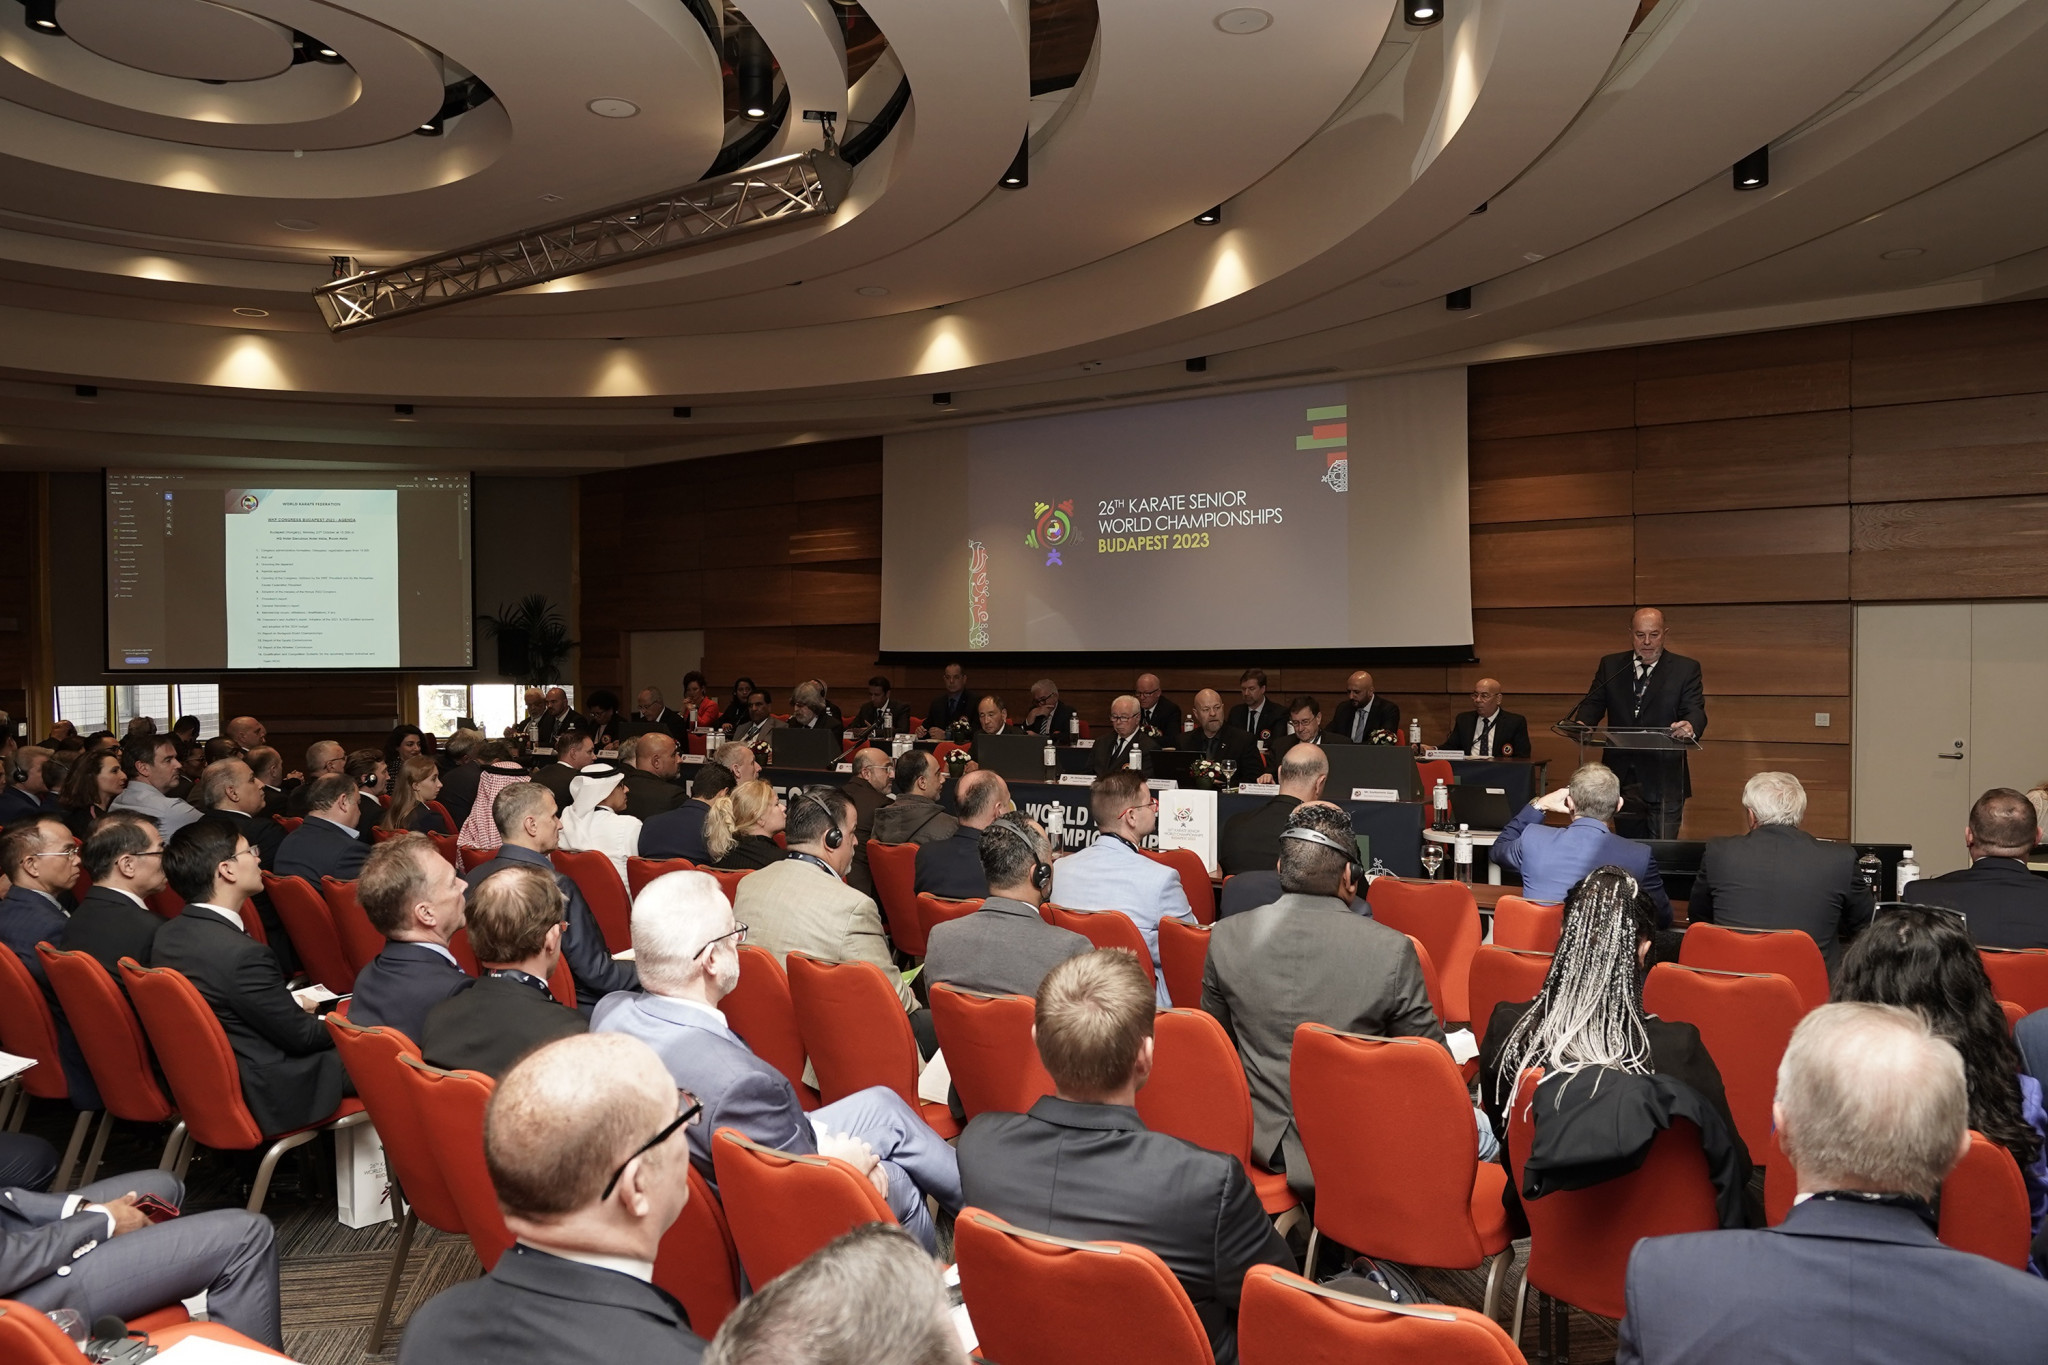 The WKF Congress was held in Budpaest where the organisation's President Antonio Espinós spoke of his frustration at the process to select the Olympic programme ©WKF